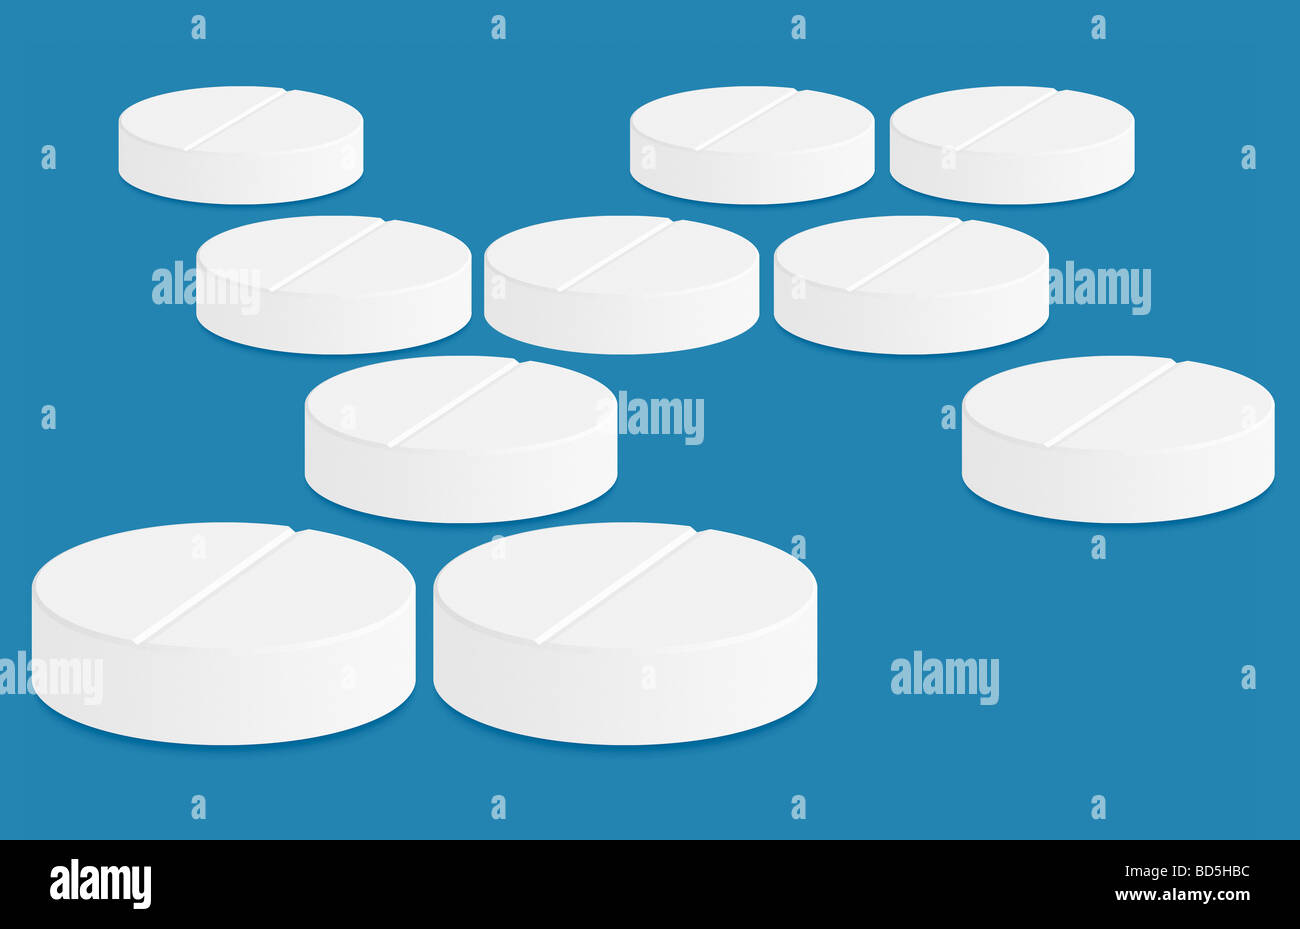 Illustration of pills on a blue background Stock Photo